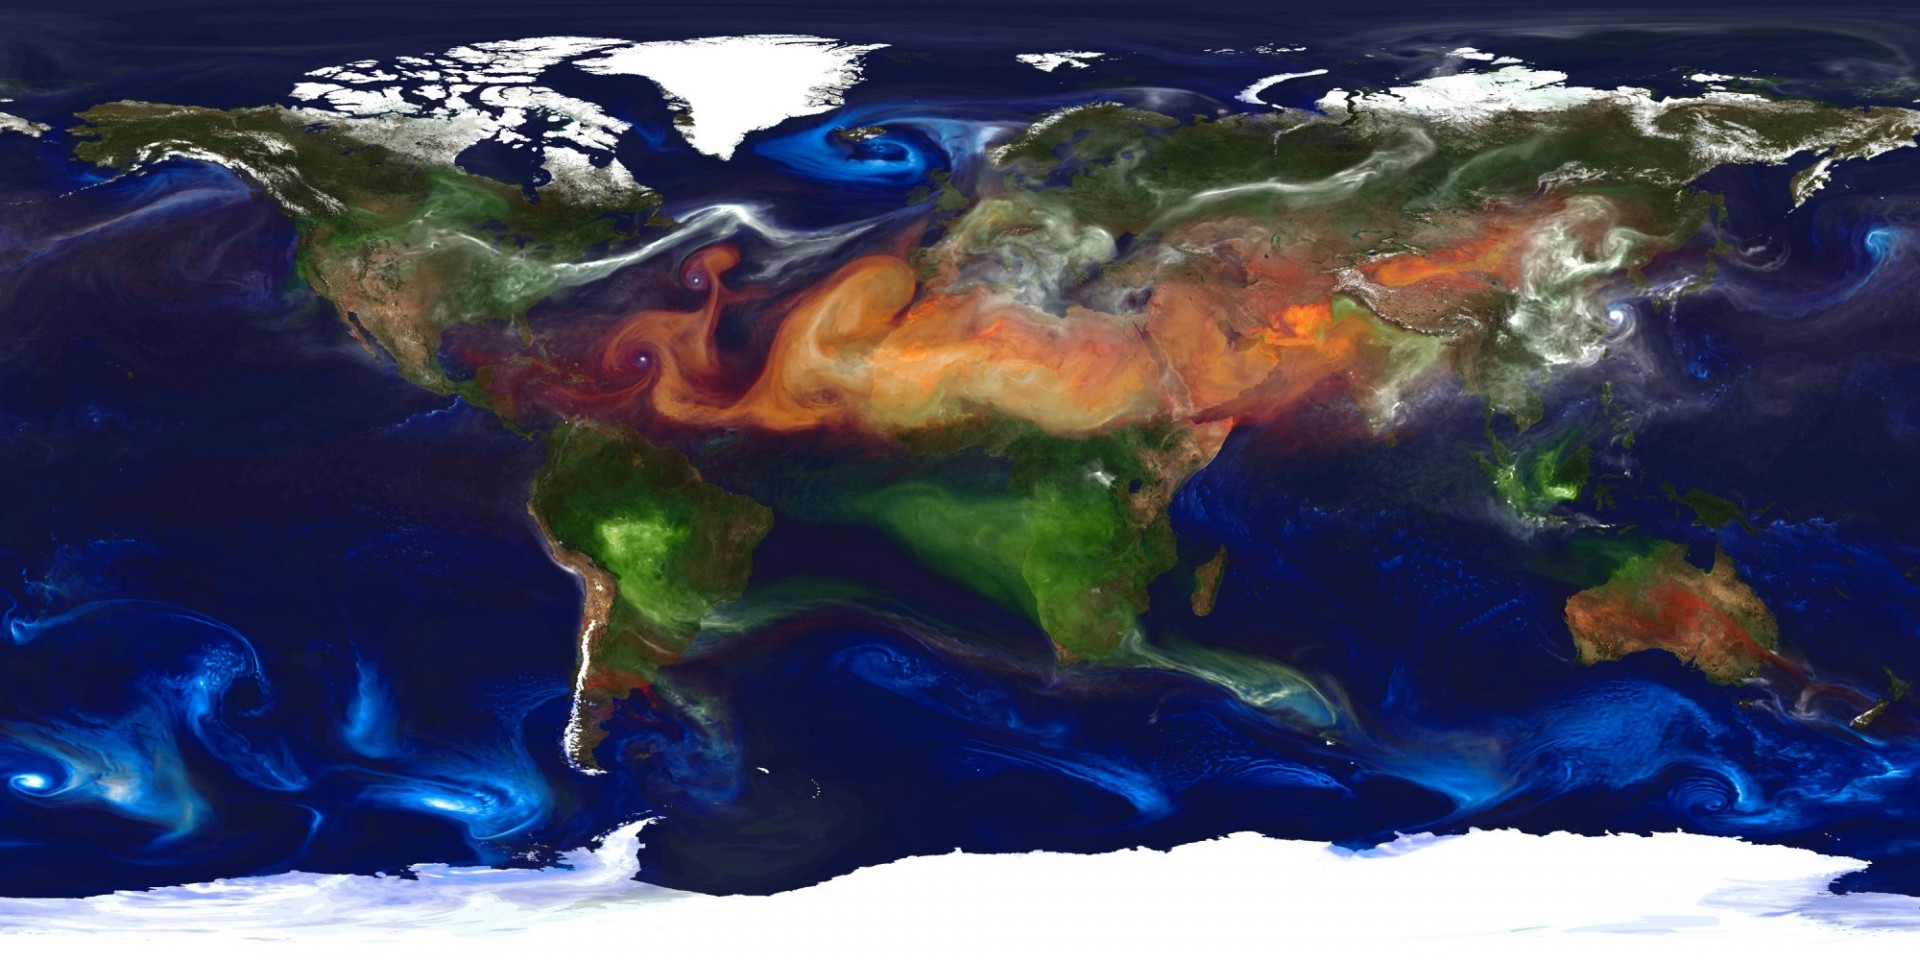 An image from a NASA Goddard Global Modeling and Assimilation Office simulation of the atmosphere that captured how winds disperse vast quantities of aerosols — dust (red), sea salt (blue), sulphate (white) and black and organic carbon (green) — around the world. Such simulations allow scientists to better understand how these tiny particulates travel in the atmosphere and influence weather and climate. Image credit: William Putman, NASA/Goddard